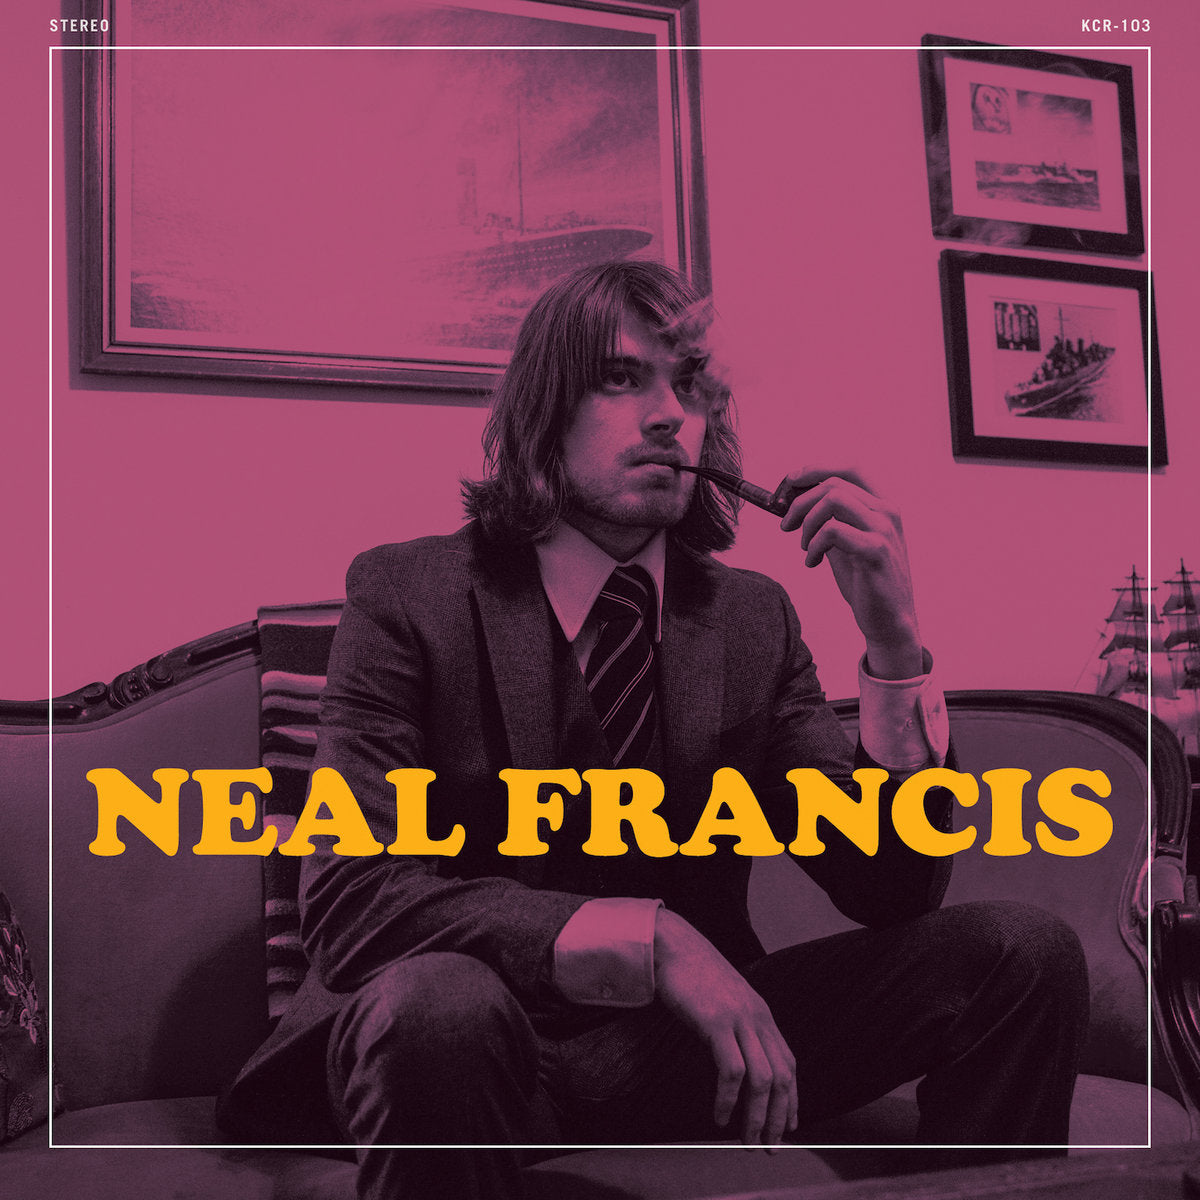 Neal Francis - These Are the Days 7”